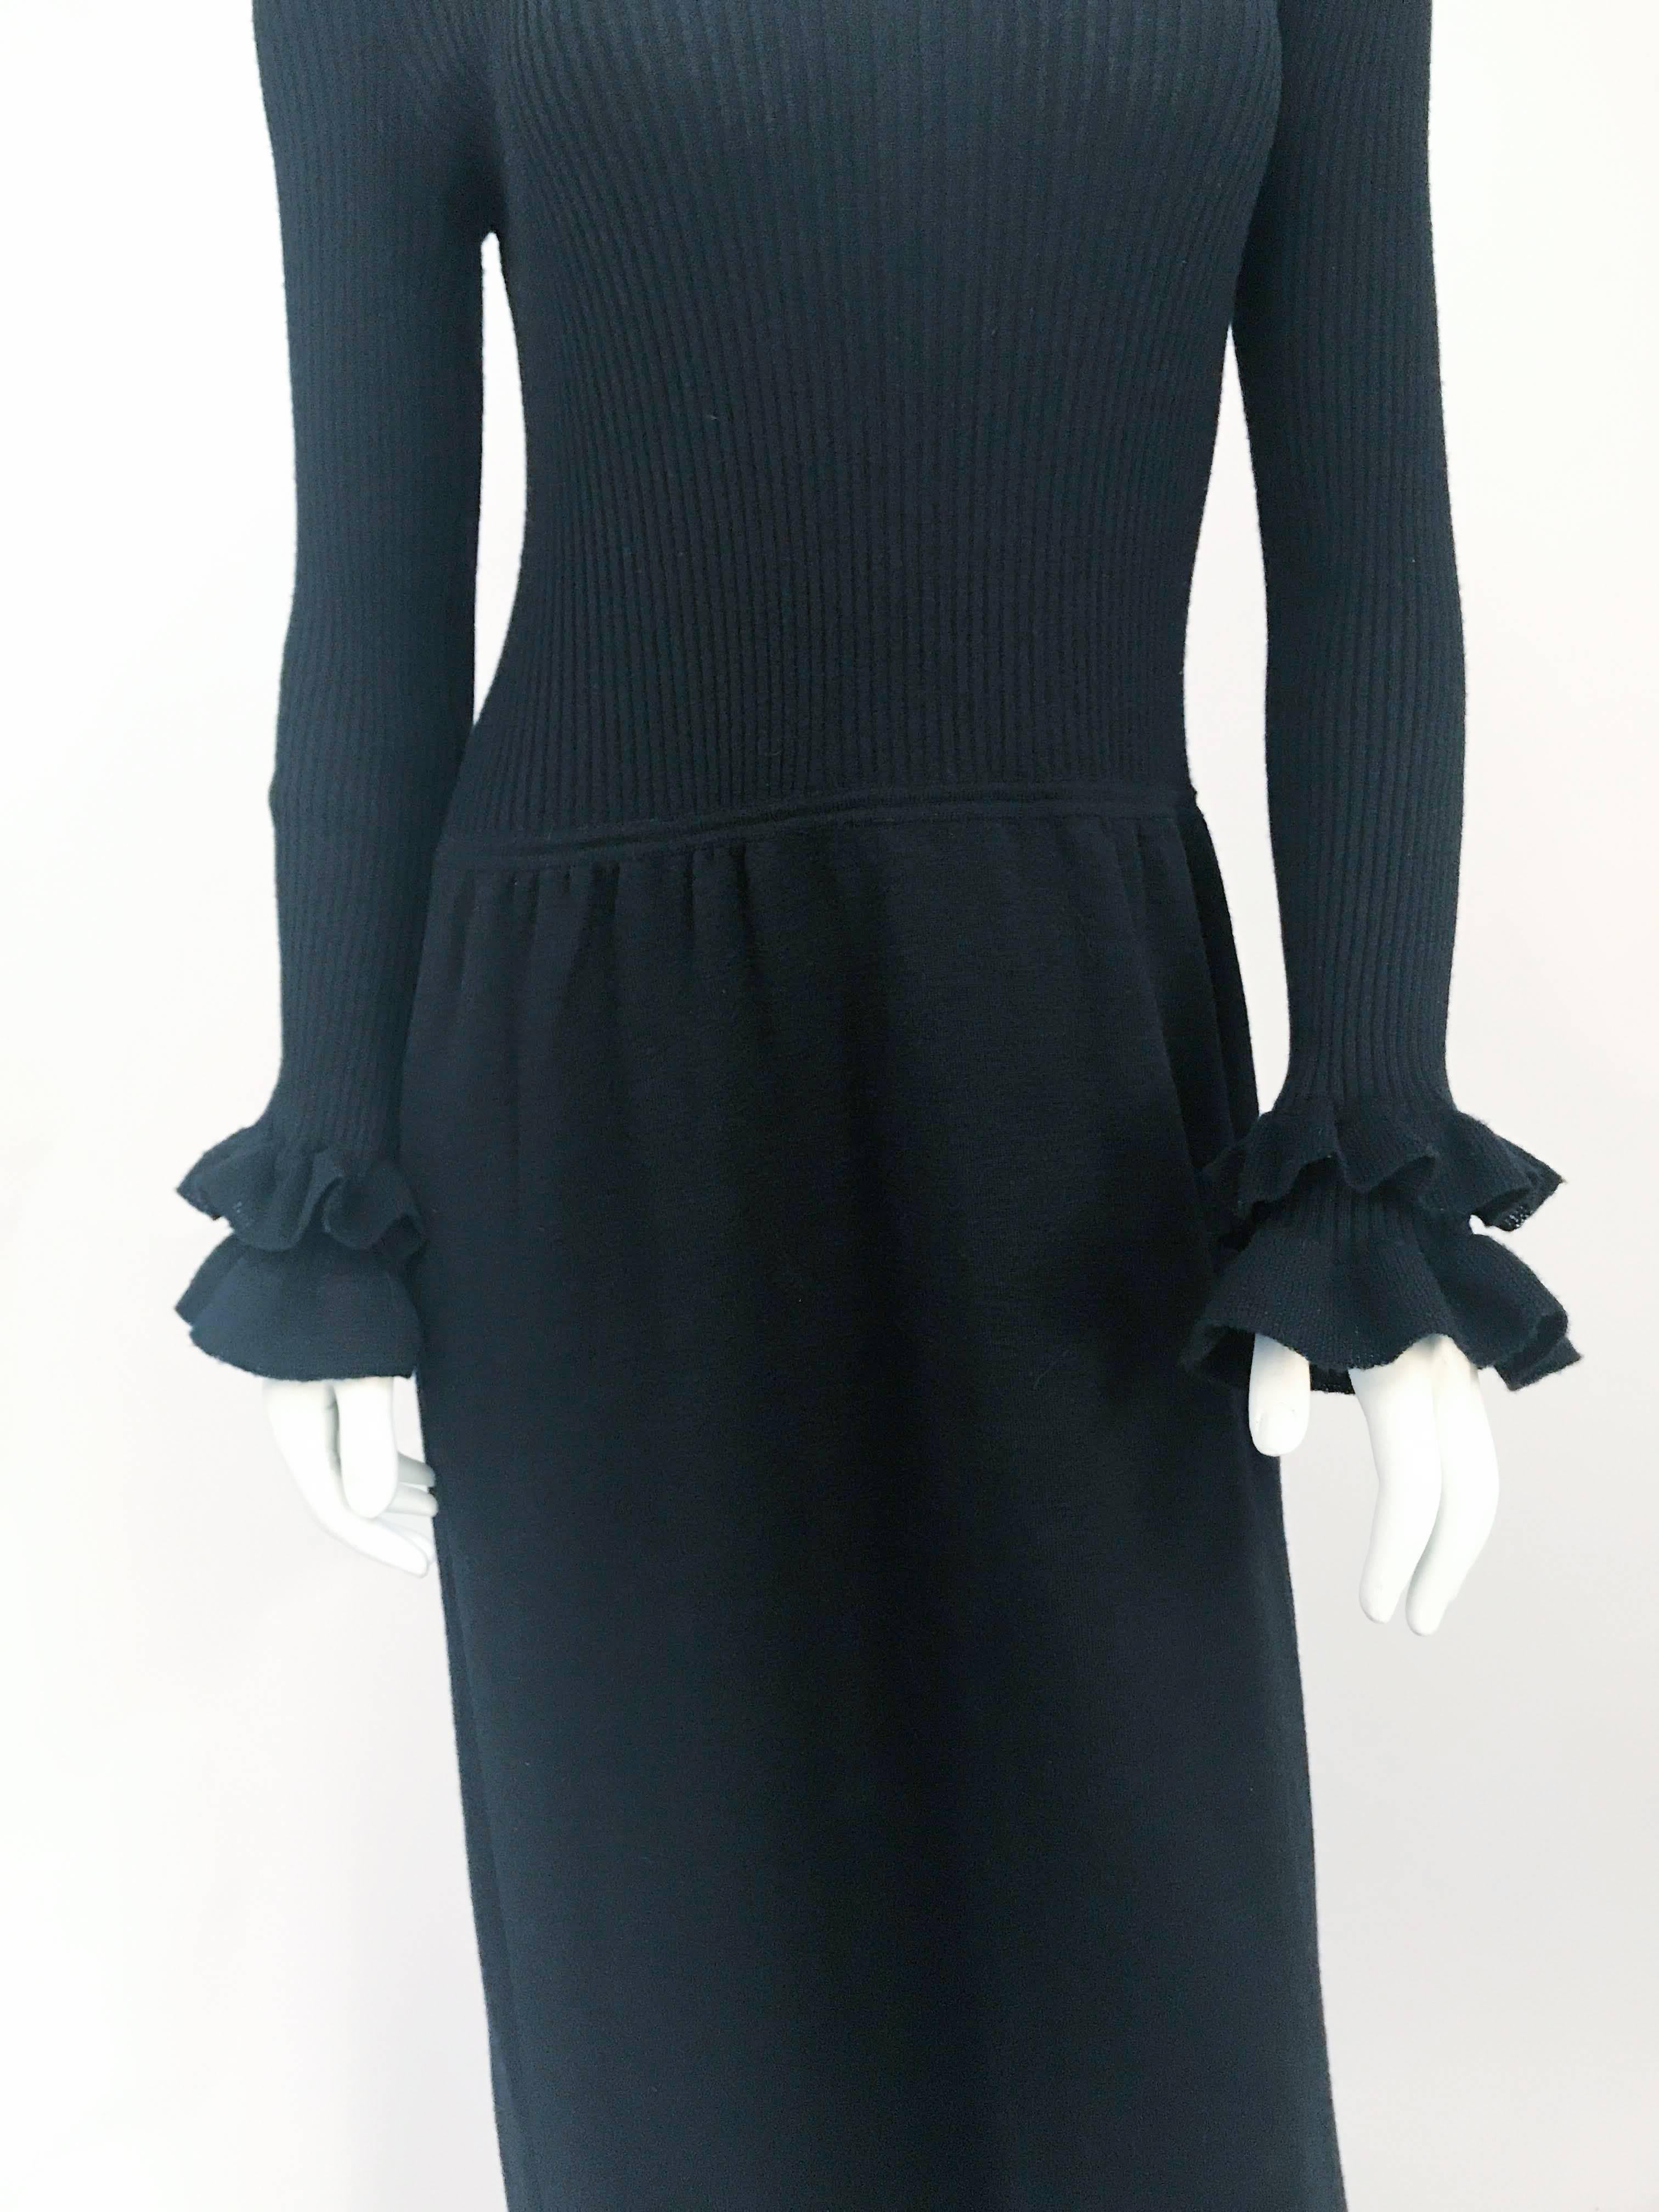 1970s Banff LTD by Gianni Ferri Black Knit Ruffled Dress. Black knit dress with ruffles along the cuff and hem. A comfortable non-itch wool and stretches.